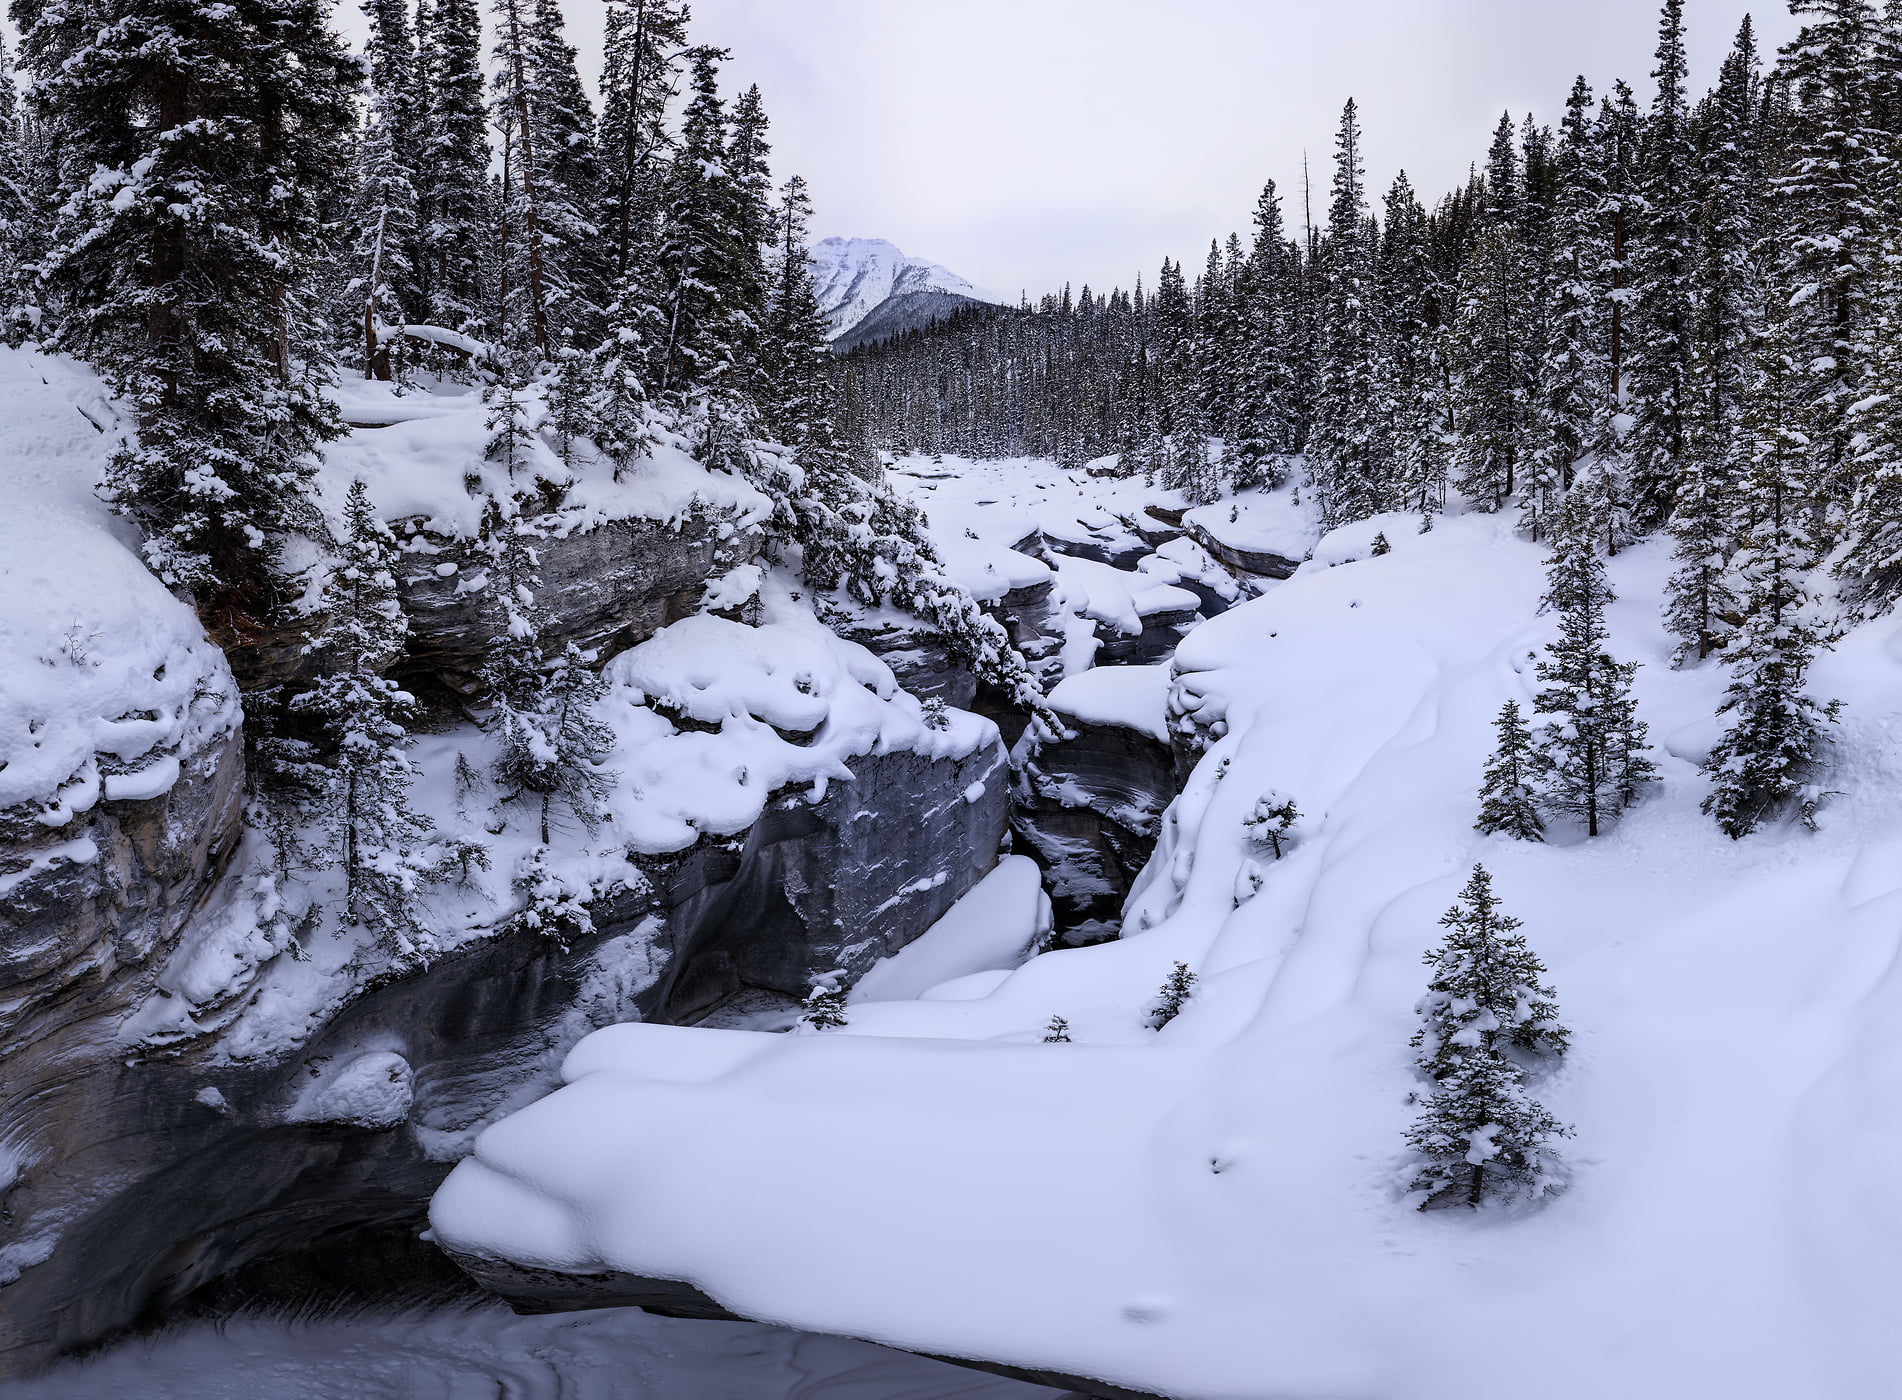 1,148 megapixels! A very high resolution, large-format VAST photo print of a snowy winter scene with evergreen trees coated in fresh snow; fine art nature photograph created by Scott Dimond in Mistaya Canyon, Banff National Park, Alberta, Canada